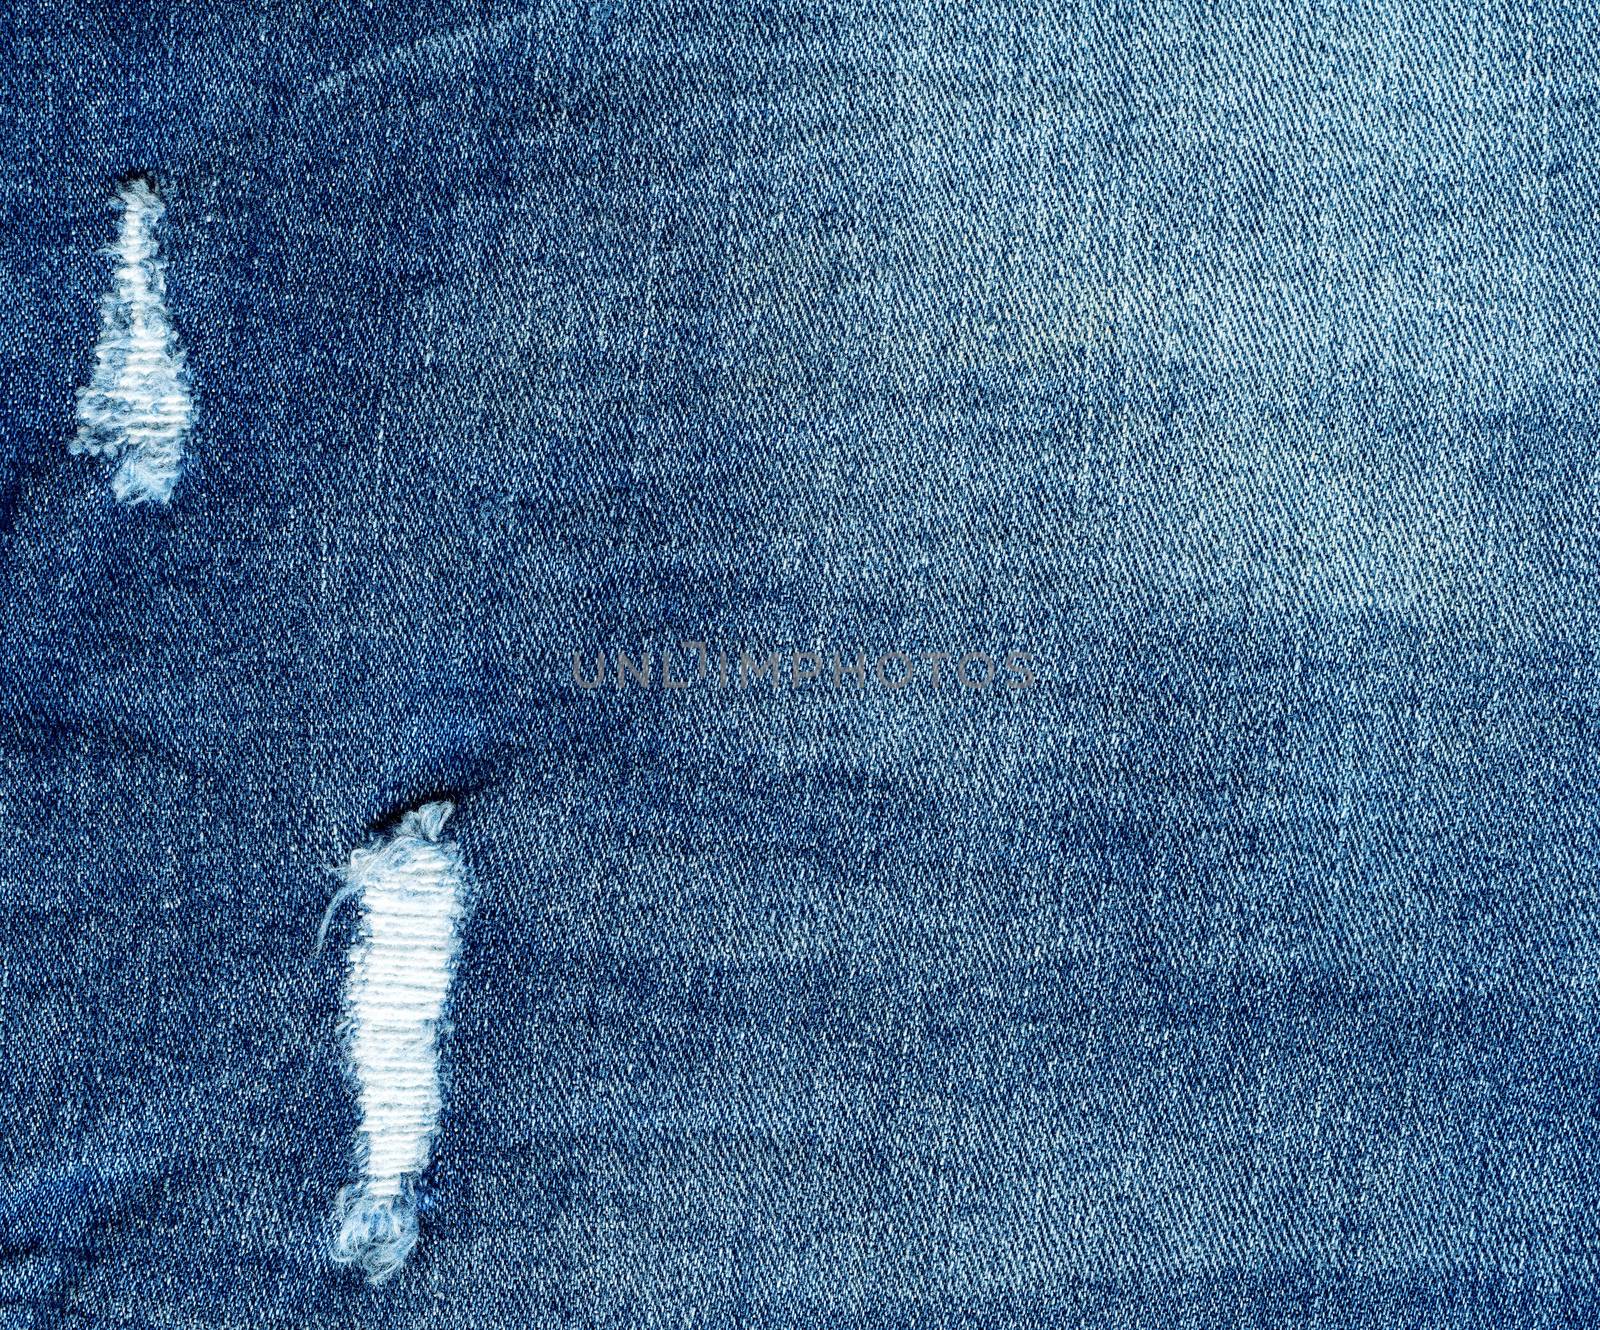 Denim texture, light torn jeans. Modern design of the old wearing ripped jeans